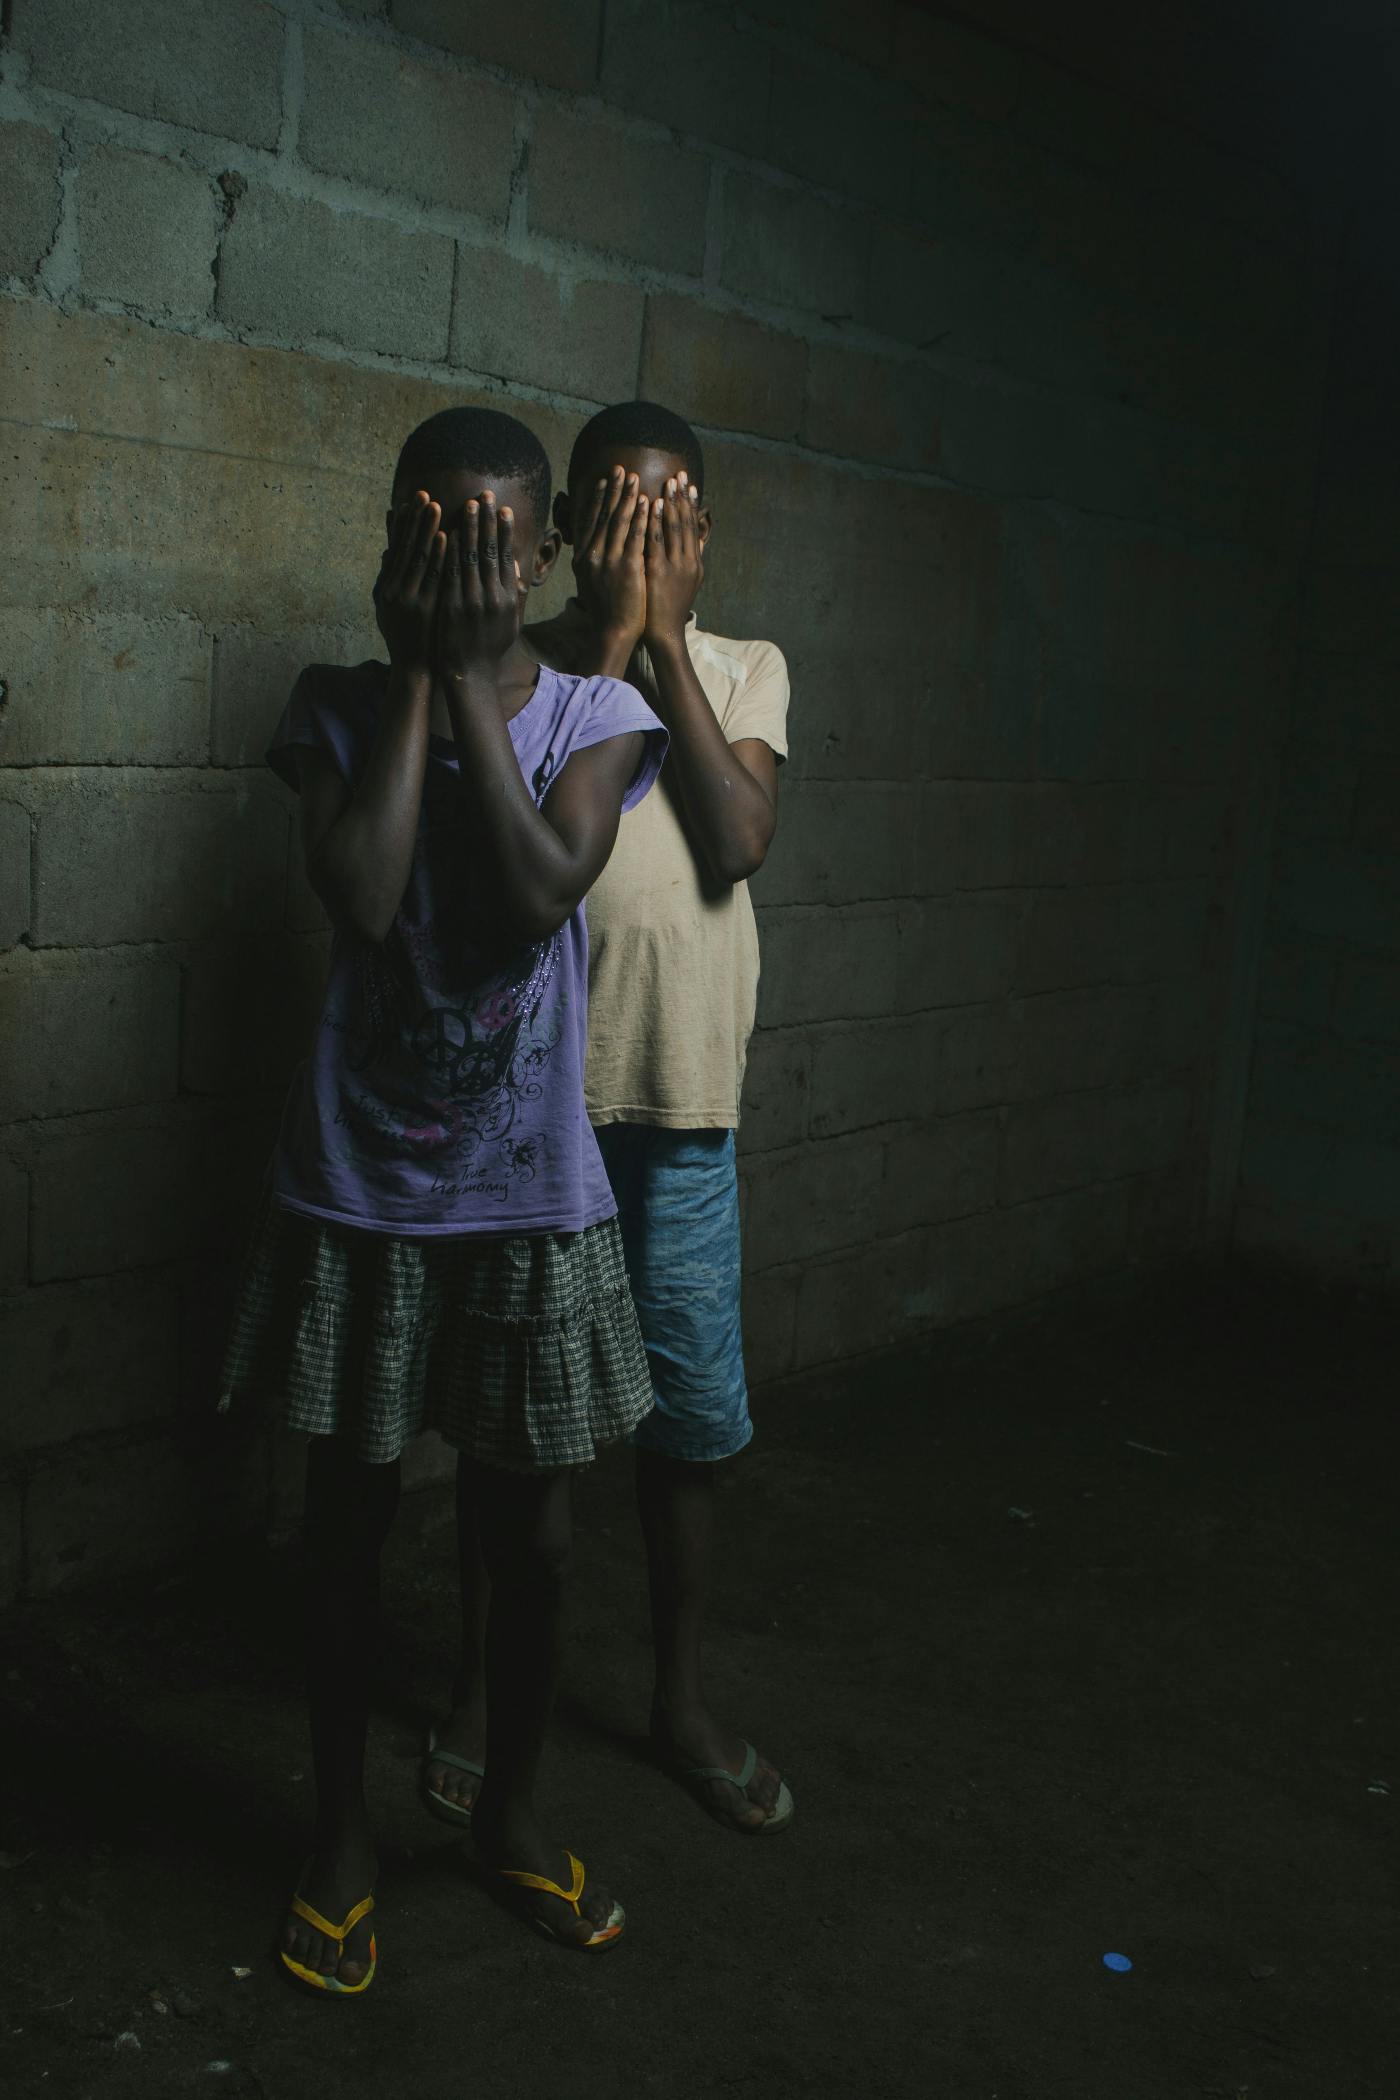 An African boy and girl covering their faces with their hands.